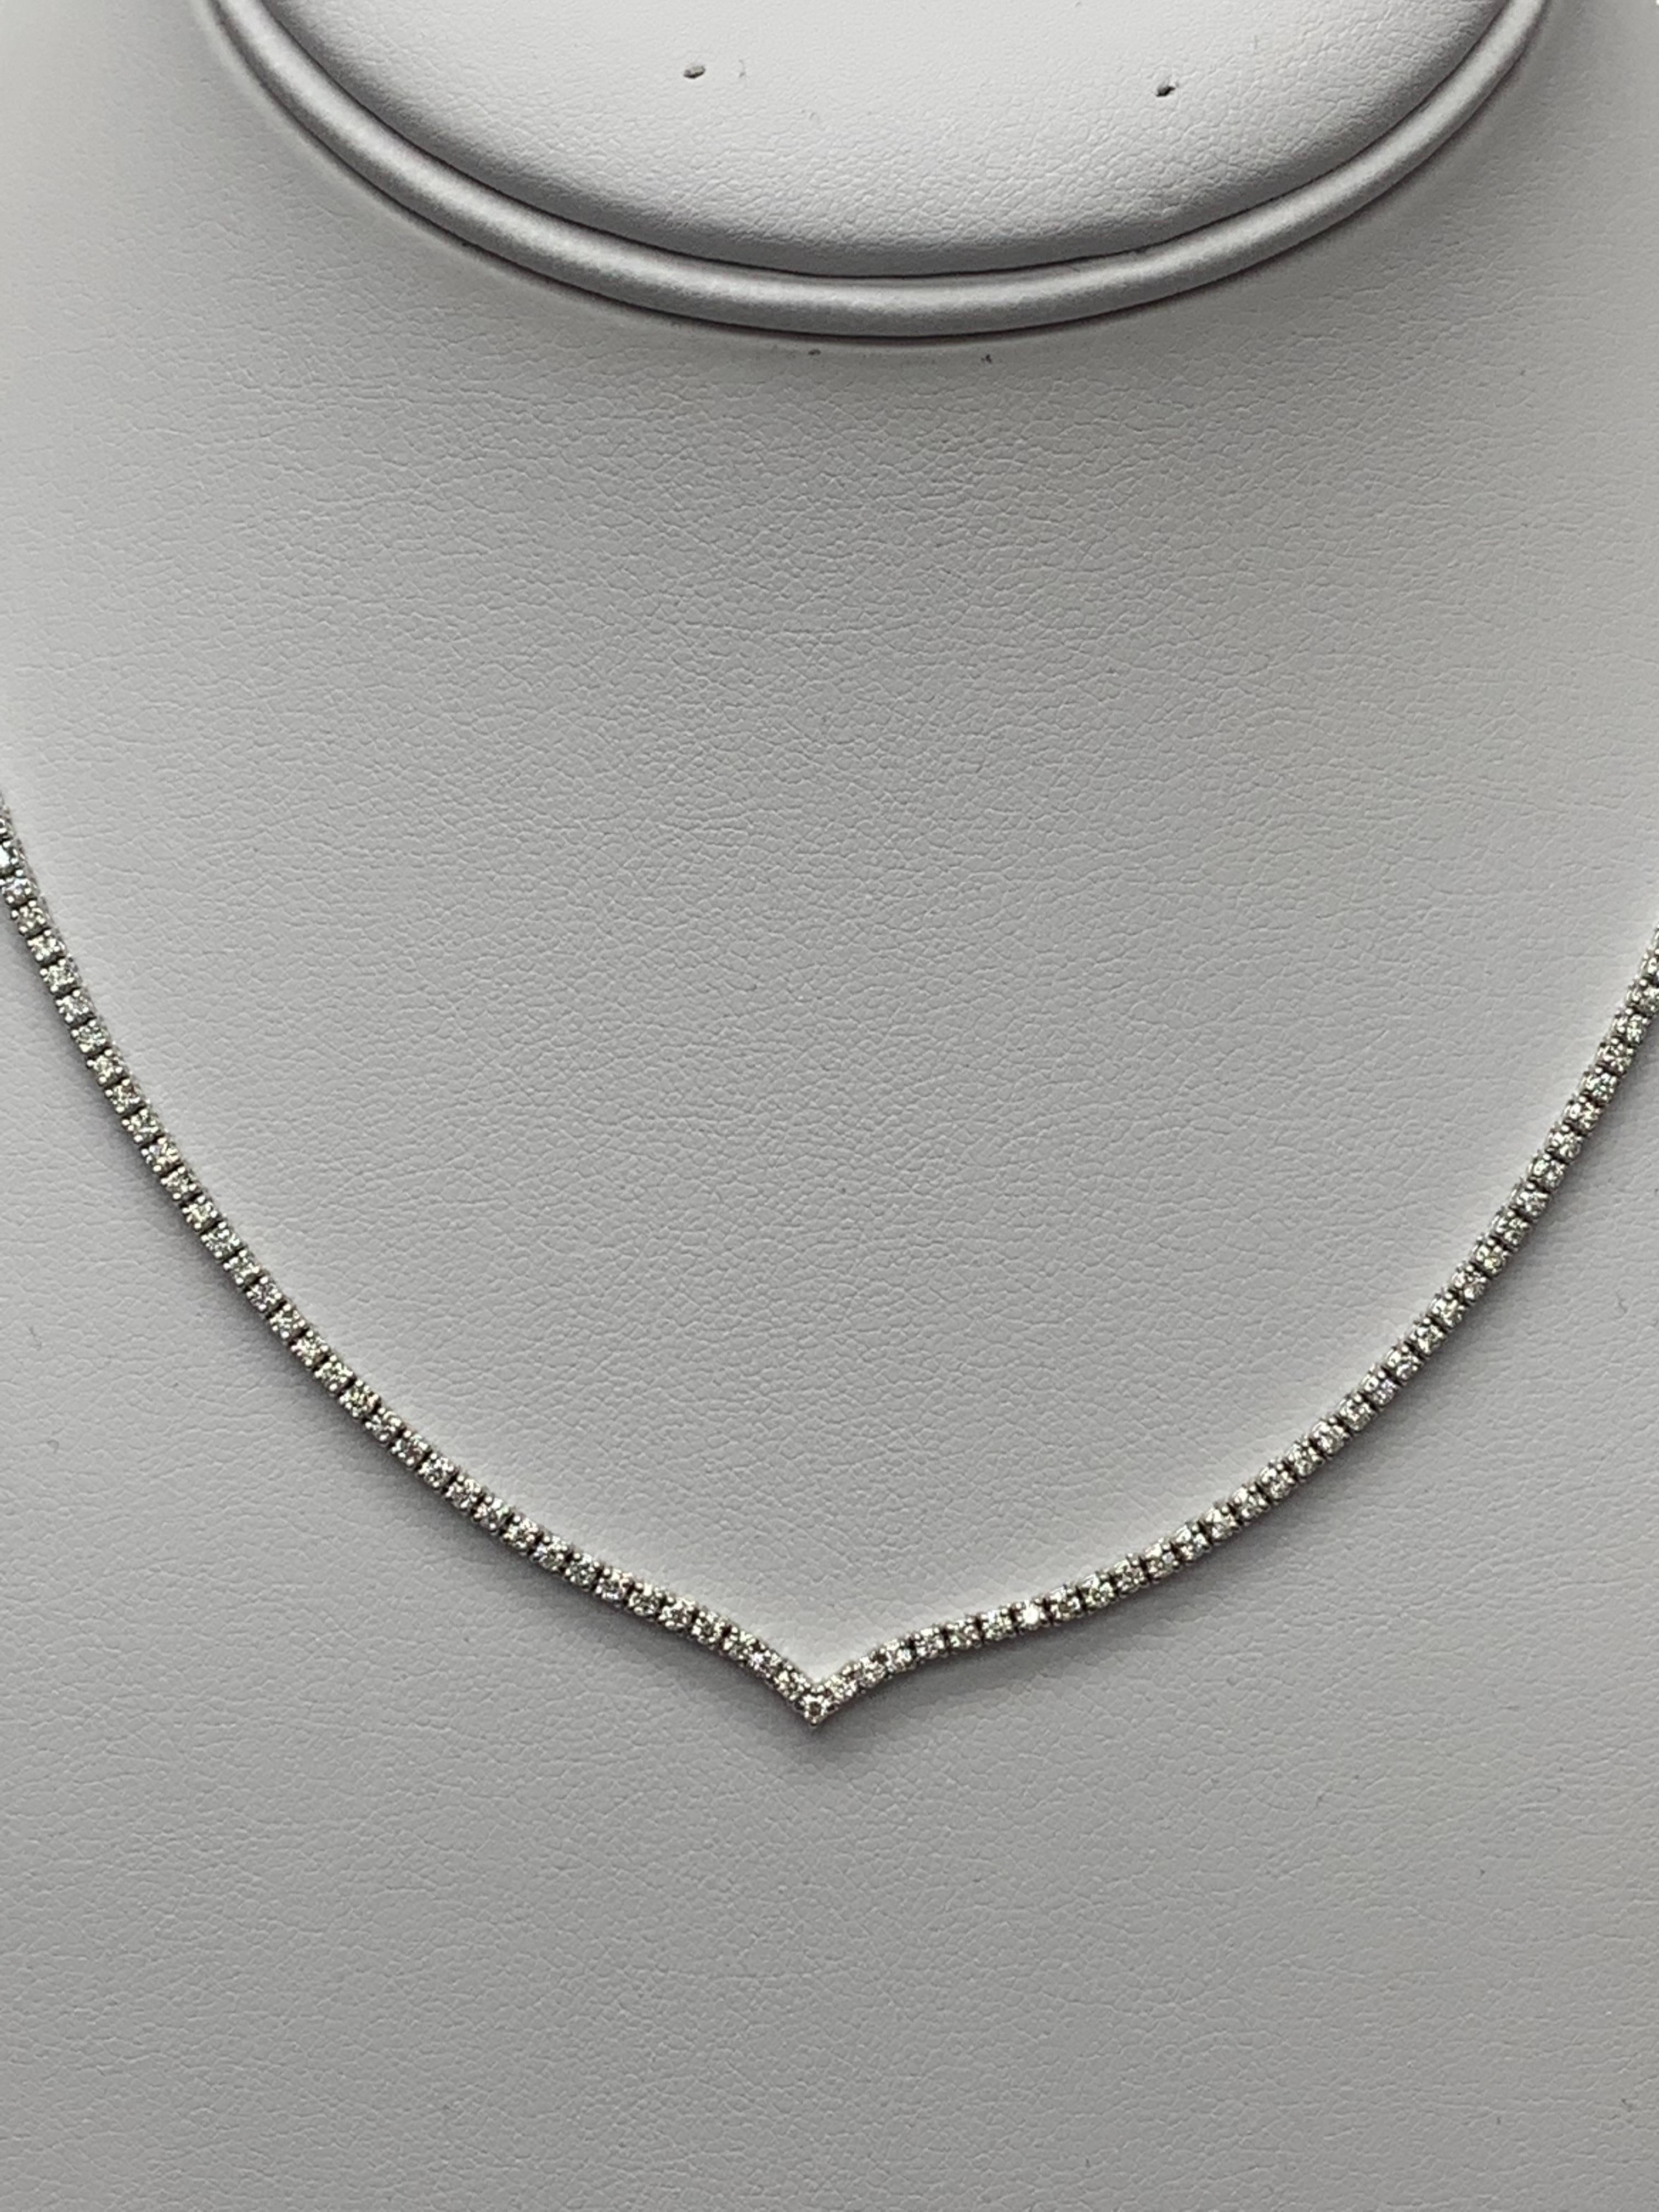 A brilliant and classic tennis necklace showcasing a line of round diamonds in 14K White Gold. The 209 diamonds in this necklace are brilliant round cut and weigh 3.58 carats in total. 16 inches in length.